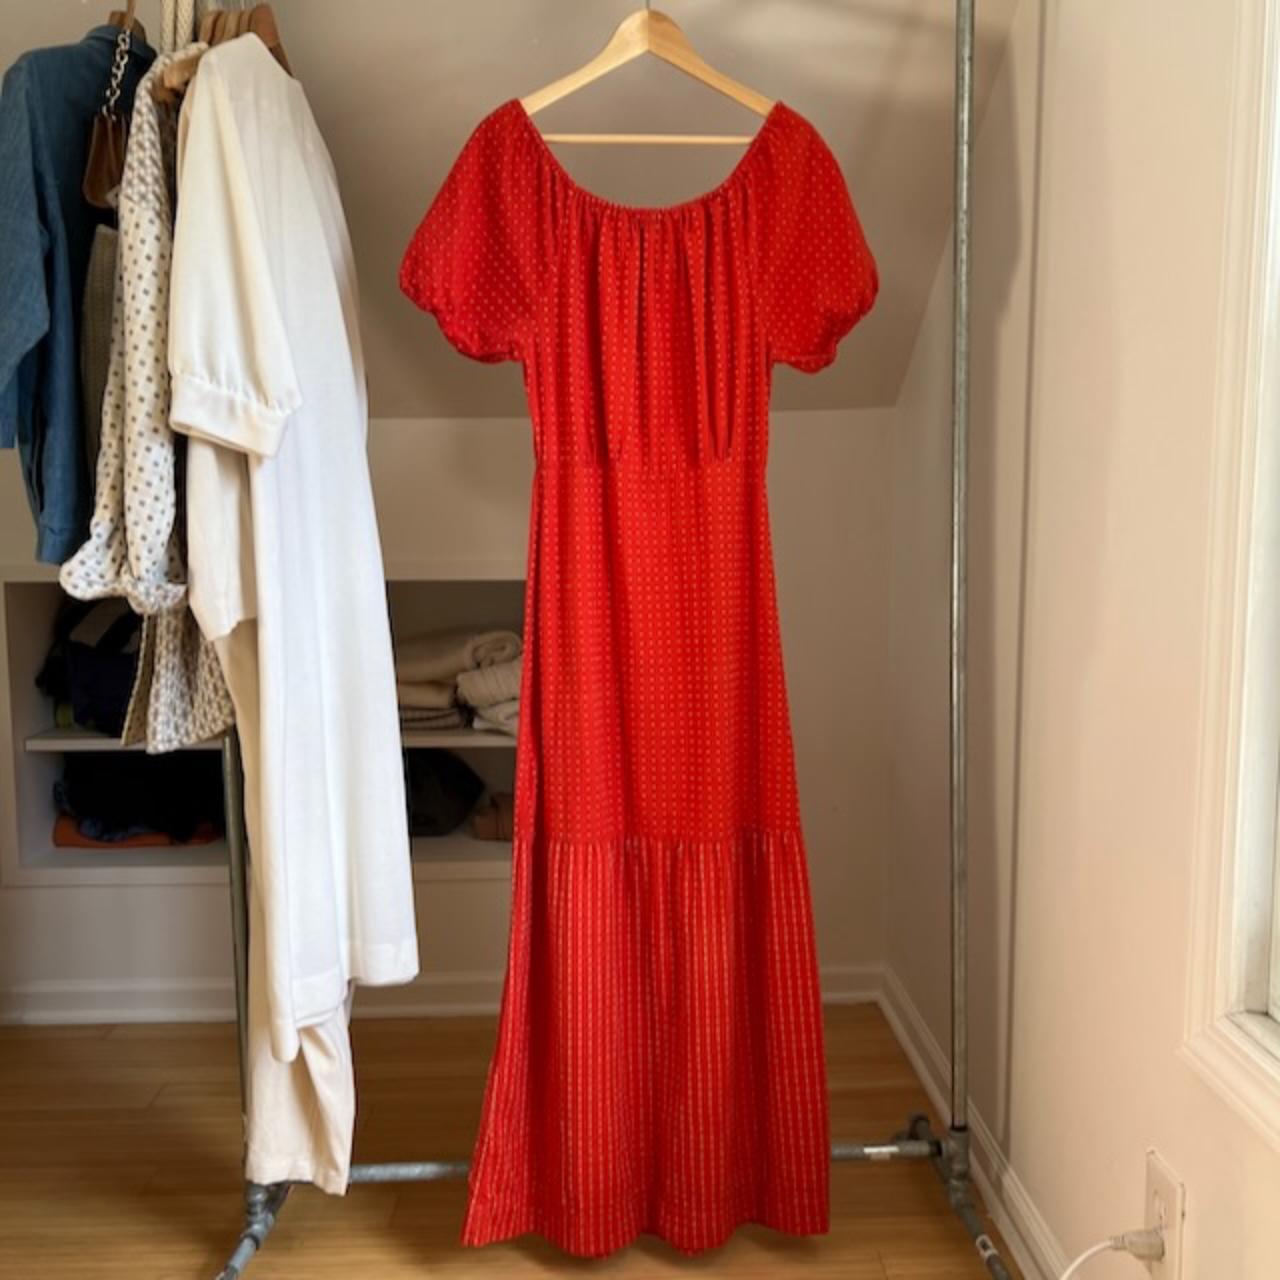 Ace & Jig Quince Dress in Sriracha Size XS (but is... - Depop